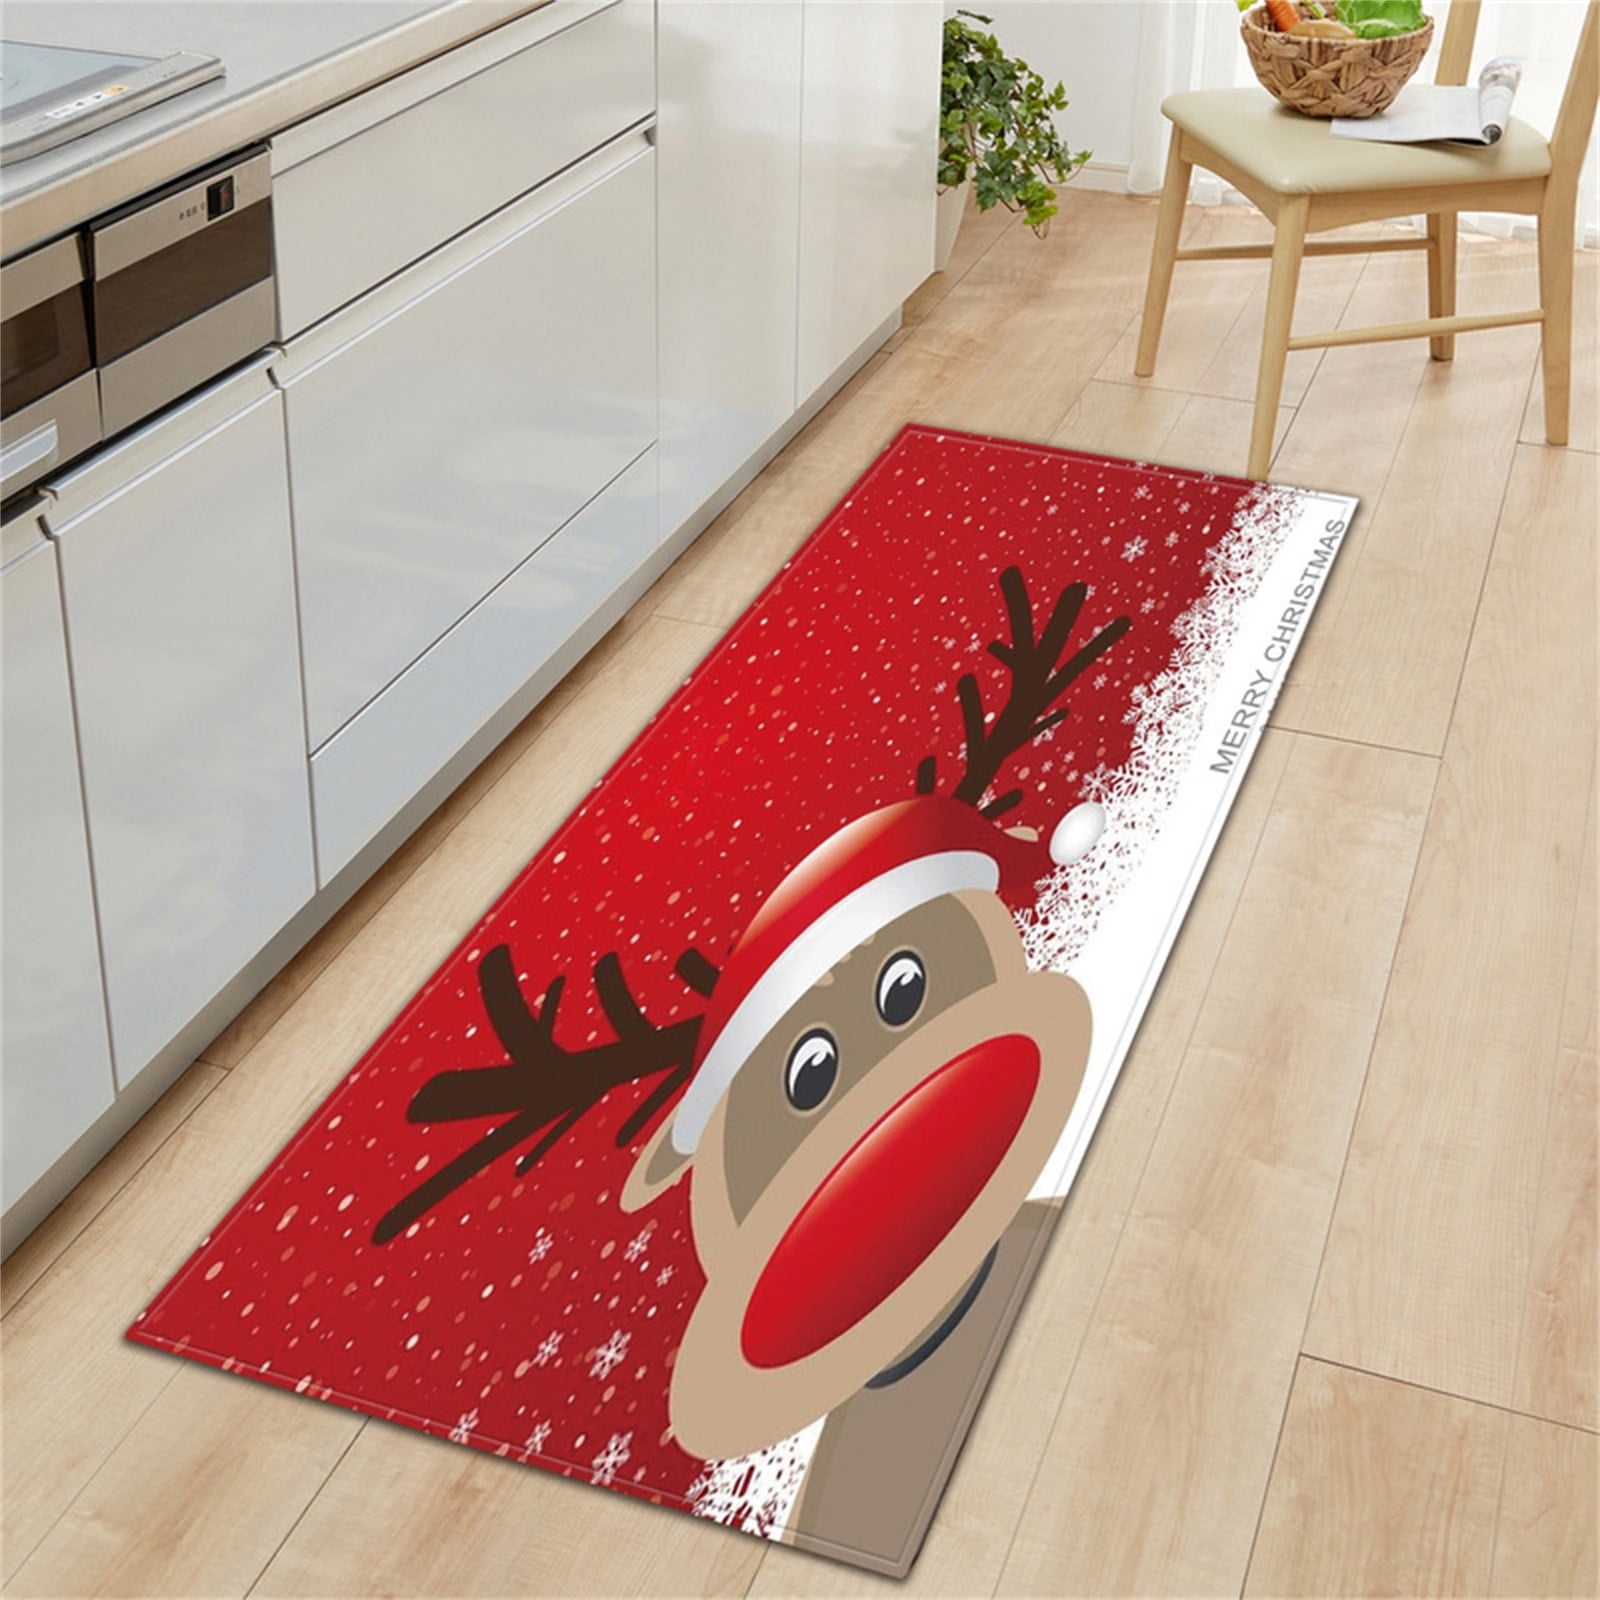 Durable a Easy to Clean Entrance Mats Waterproof and Non-Slip Foot Mats Door Mats Christmas Decorations Color : C, Size : 40cm×60cm 